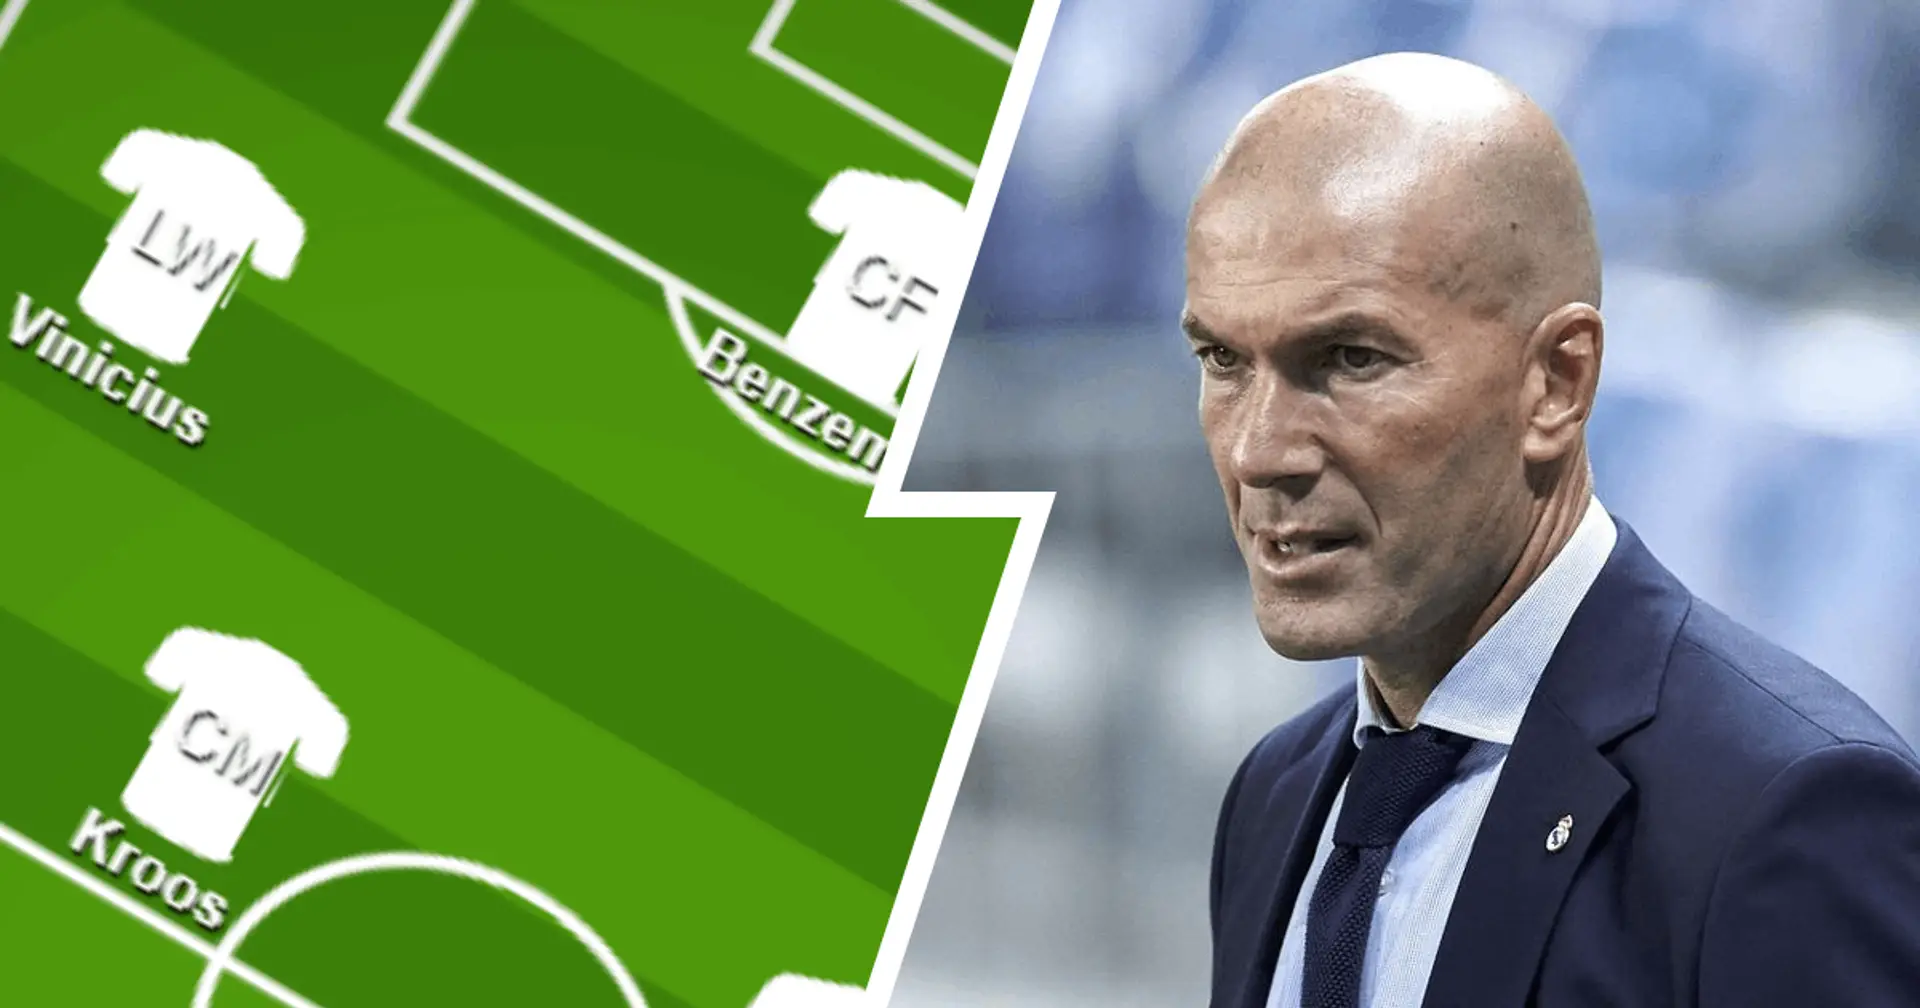 Real Madrid vs Atletico Madrid preview: line-ups, score predictions, stats & more